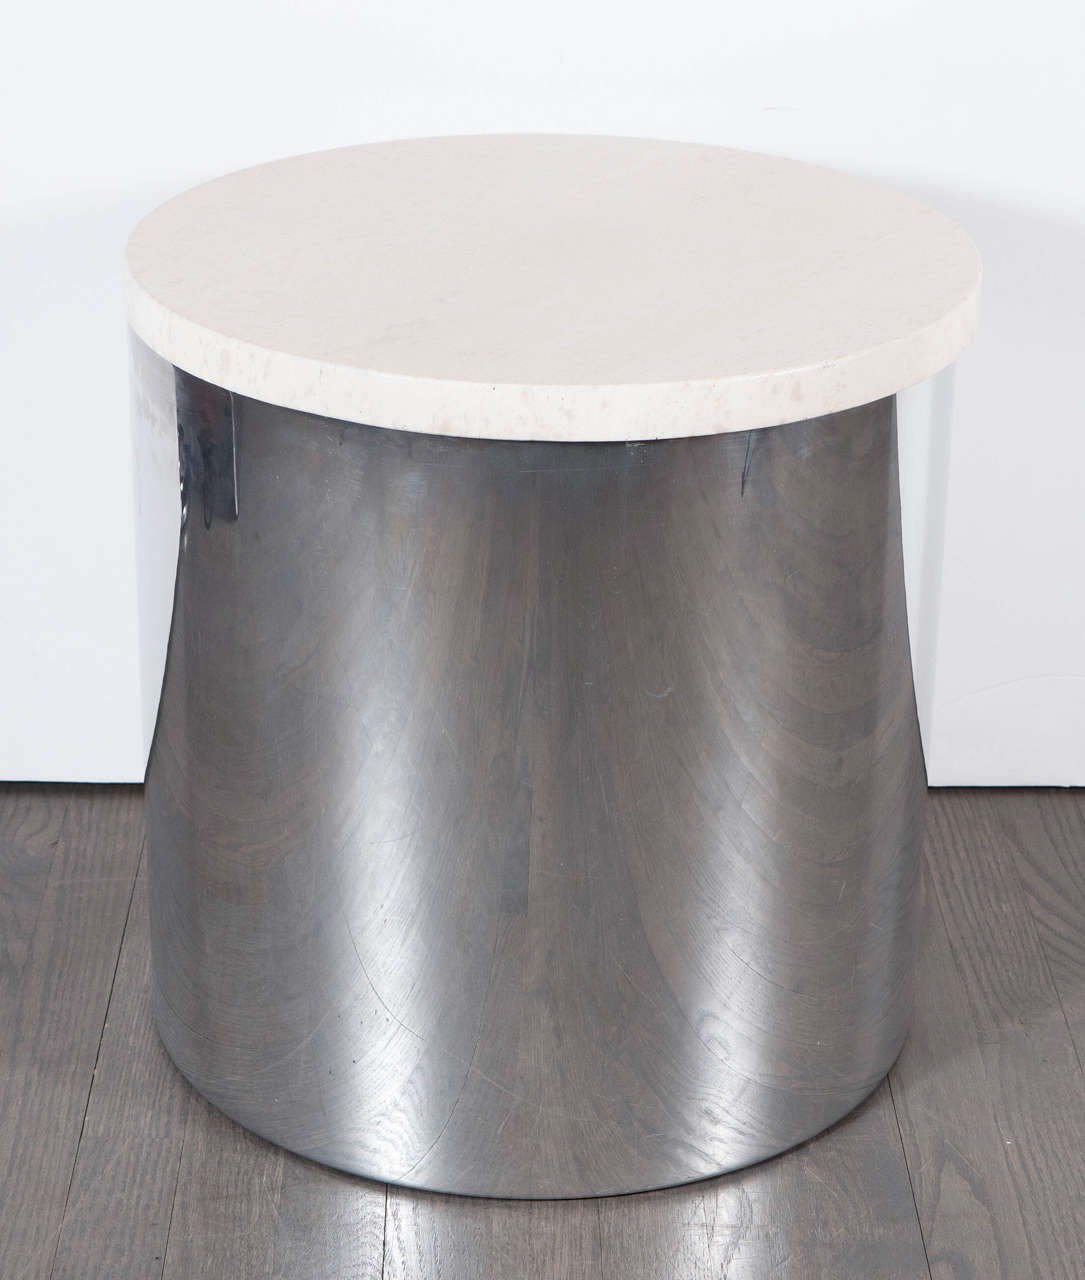 This Mid-Century Modernist Drum Table is by Paul Mayen for Habitat. If features a cylindrical chrome base inset with a exquisite travertine top.This table would fit well in any decor and is a great size.